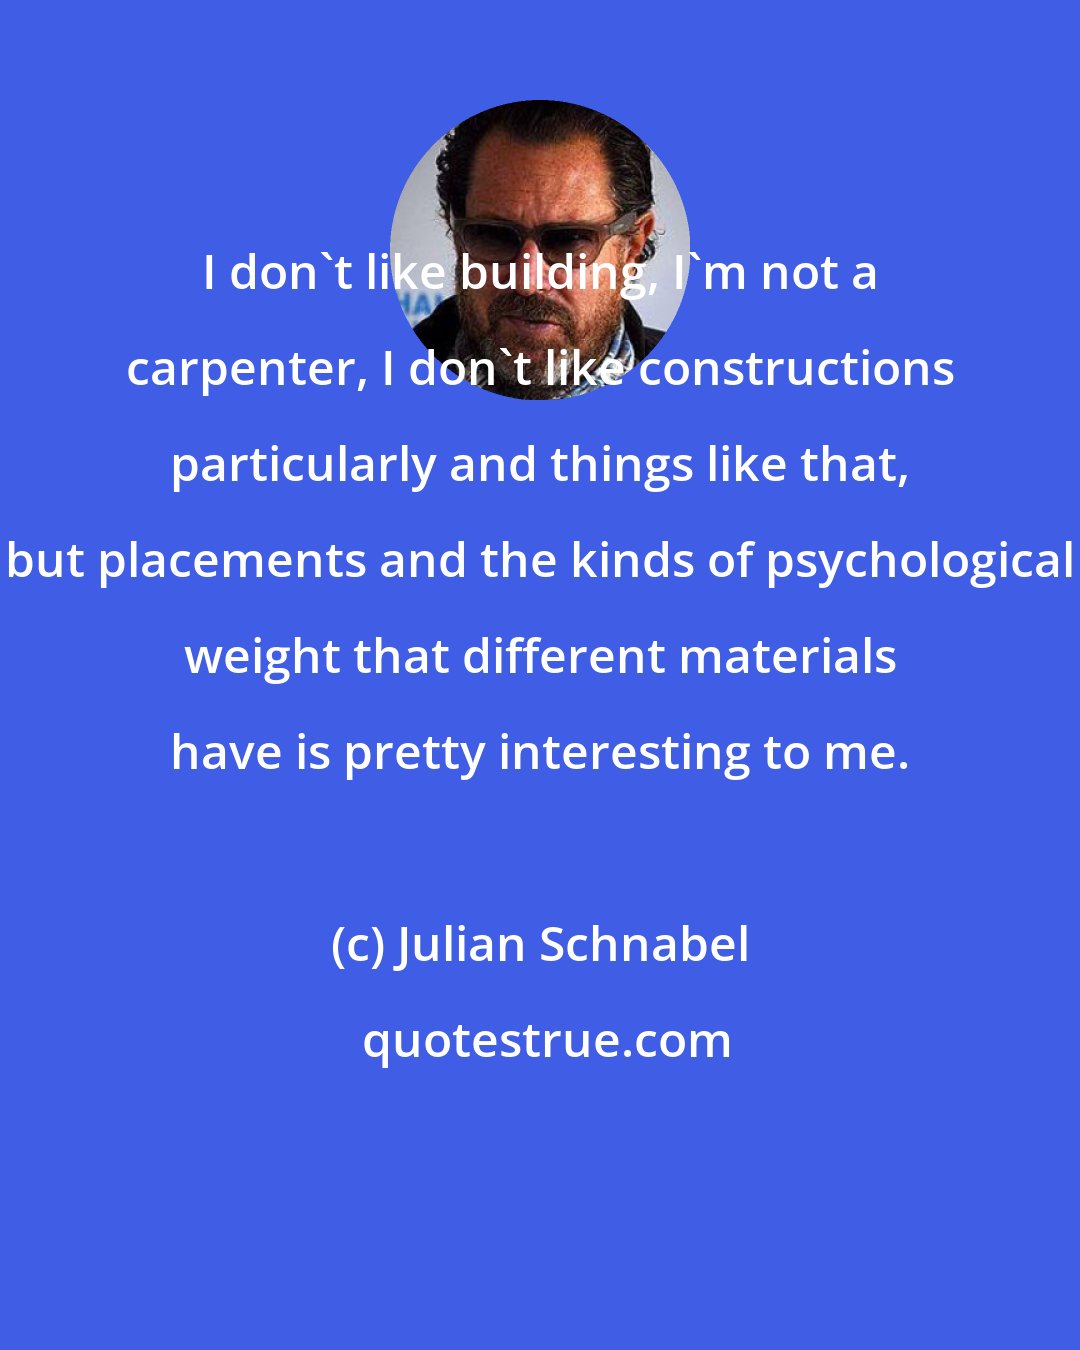 Julian Schnabel: I don't like building, I'm not a carpenter, I don't like constructions particularly and things like that, but placements and the kinds of psychological weight that different materials have is pretty interesting to me.